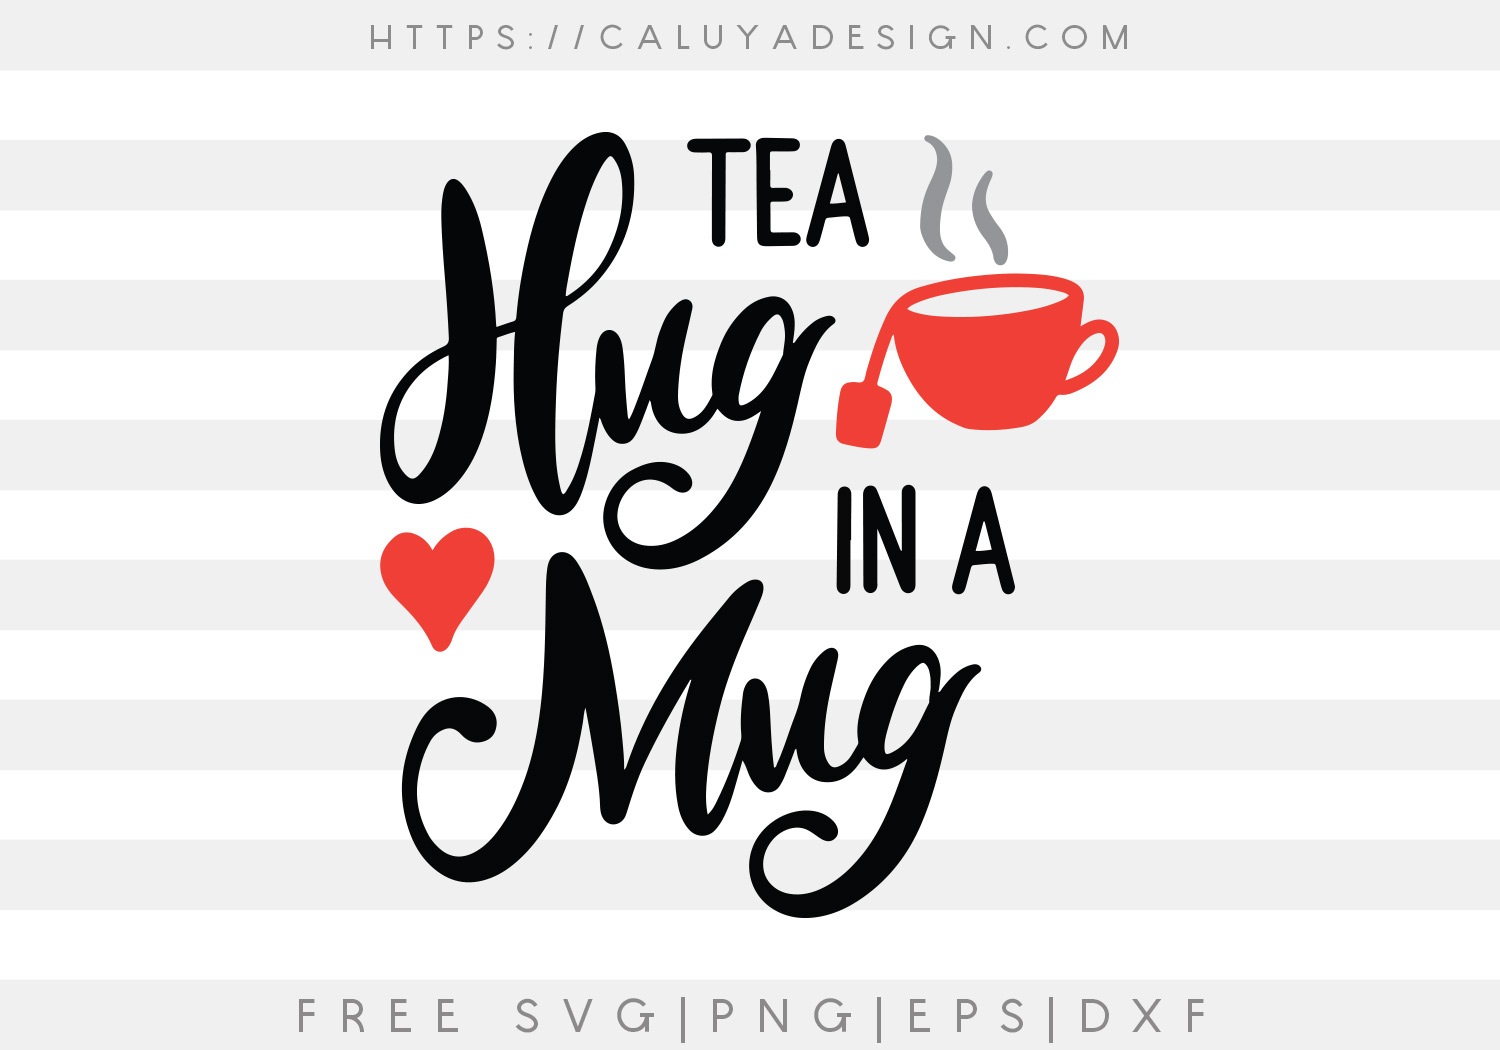 Coffee is a Hug in a Mug SVG Positive Quote Inspirational Life Designs Svg Cut Files Cricut Silhouette Files DXF EPS